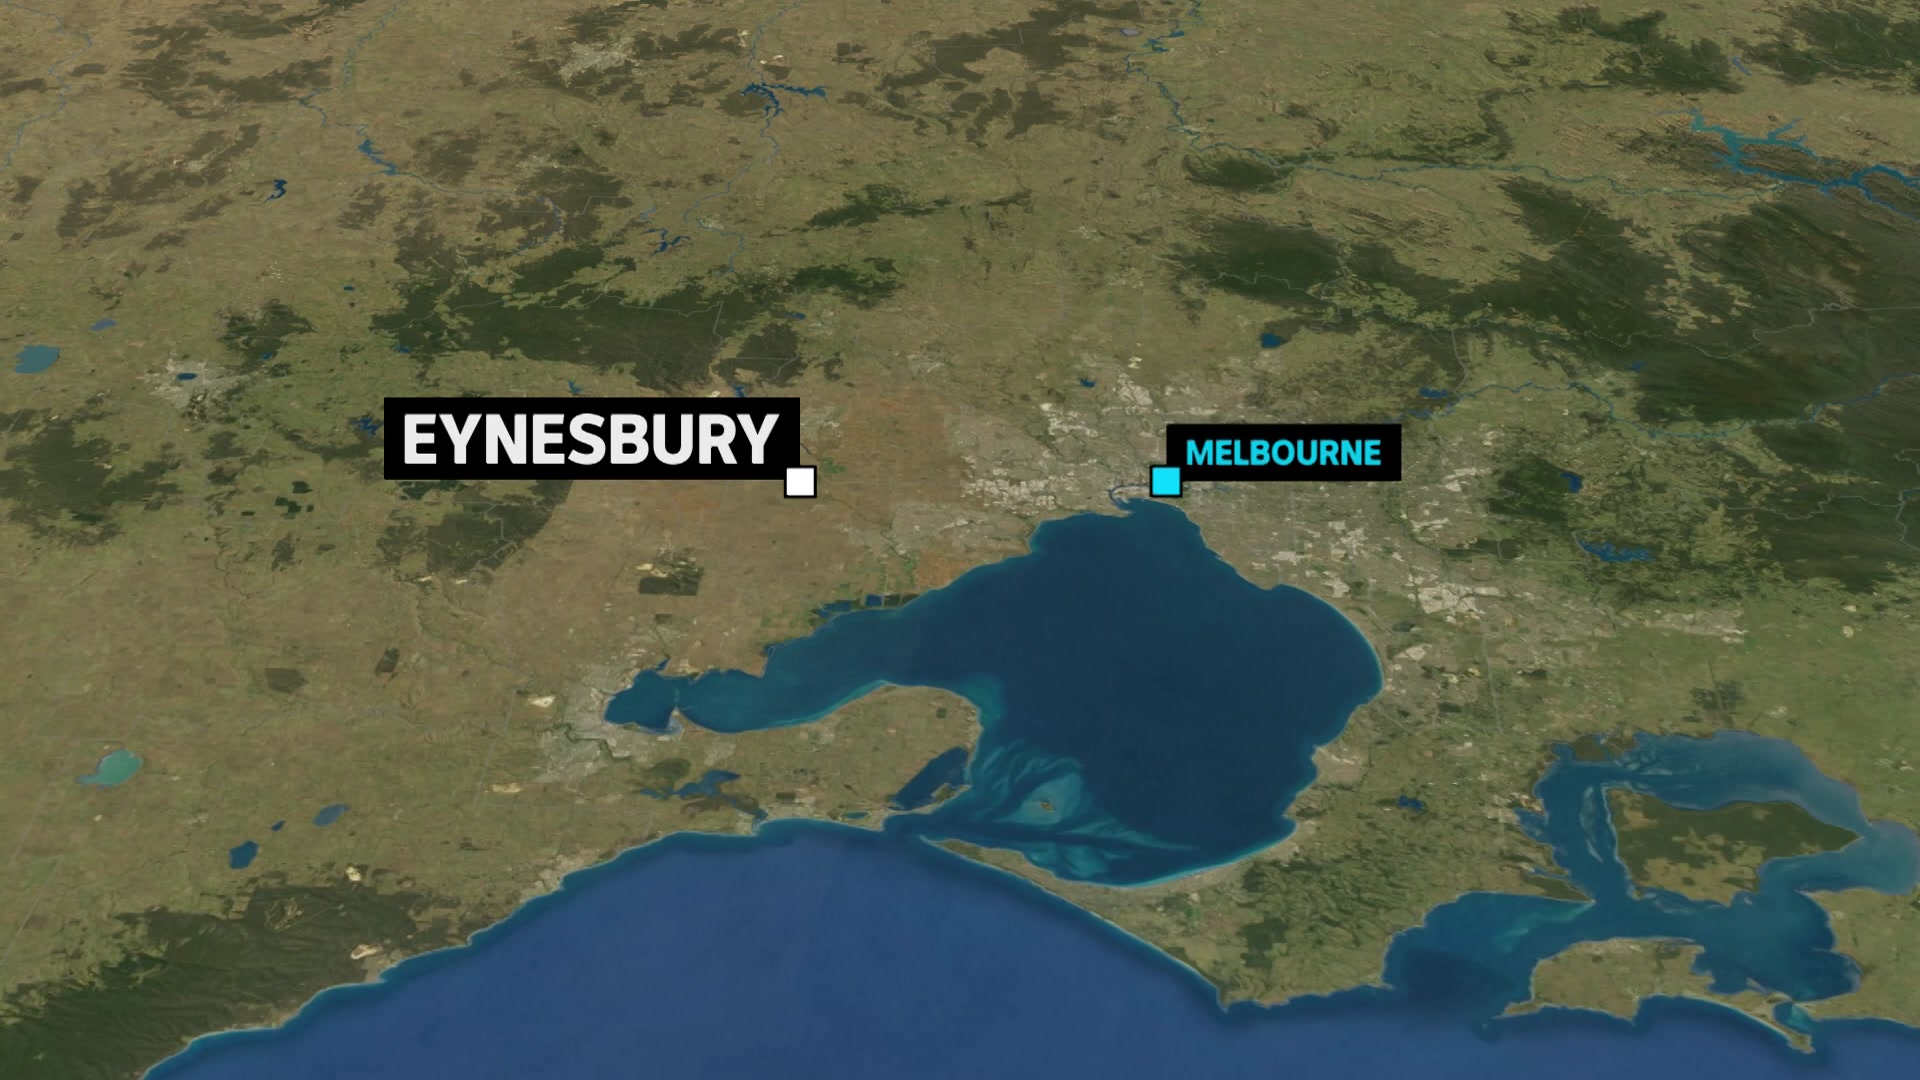 A map showing Melbourne and Eynesbury.